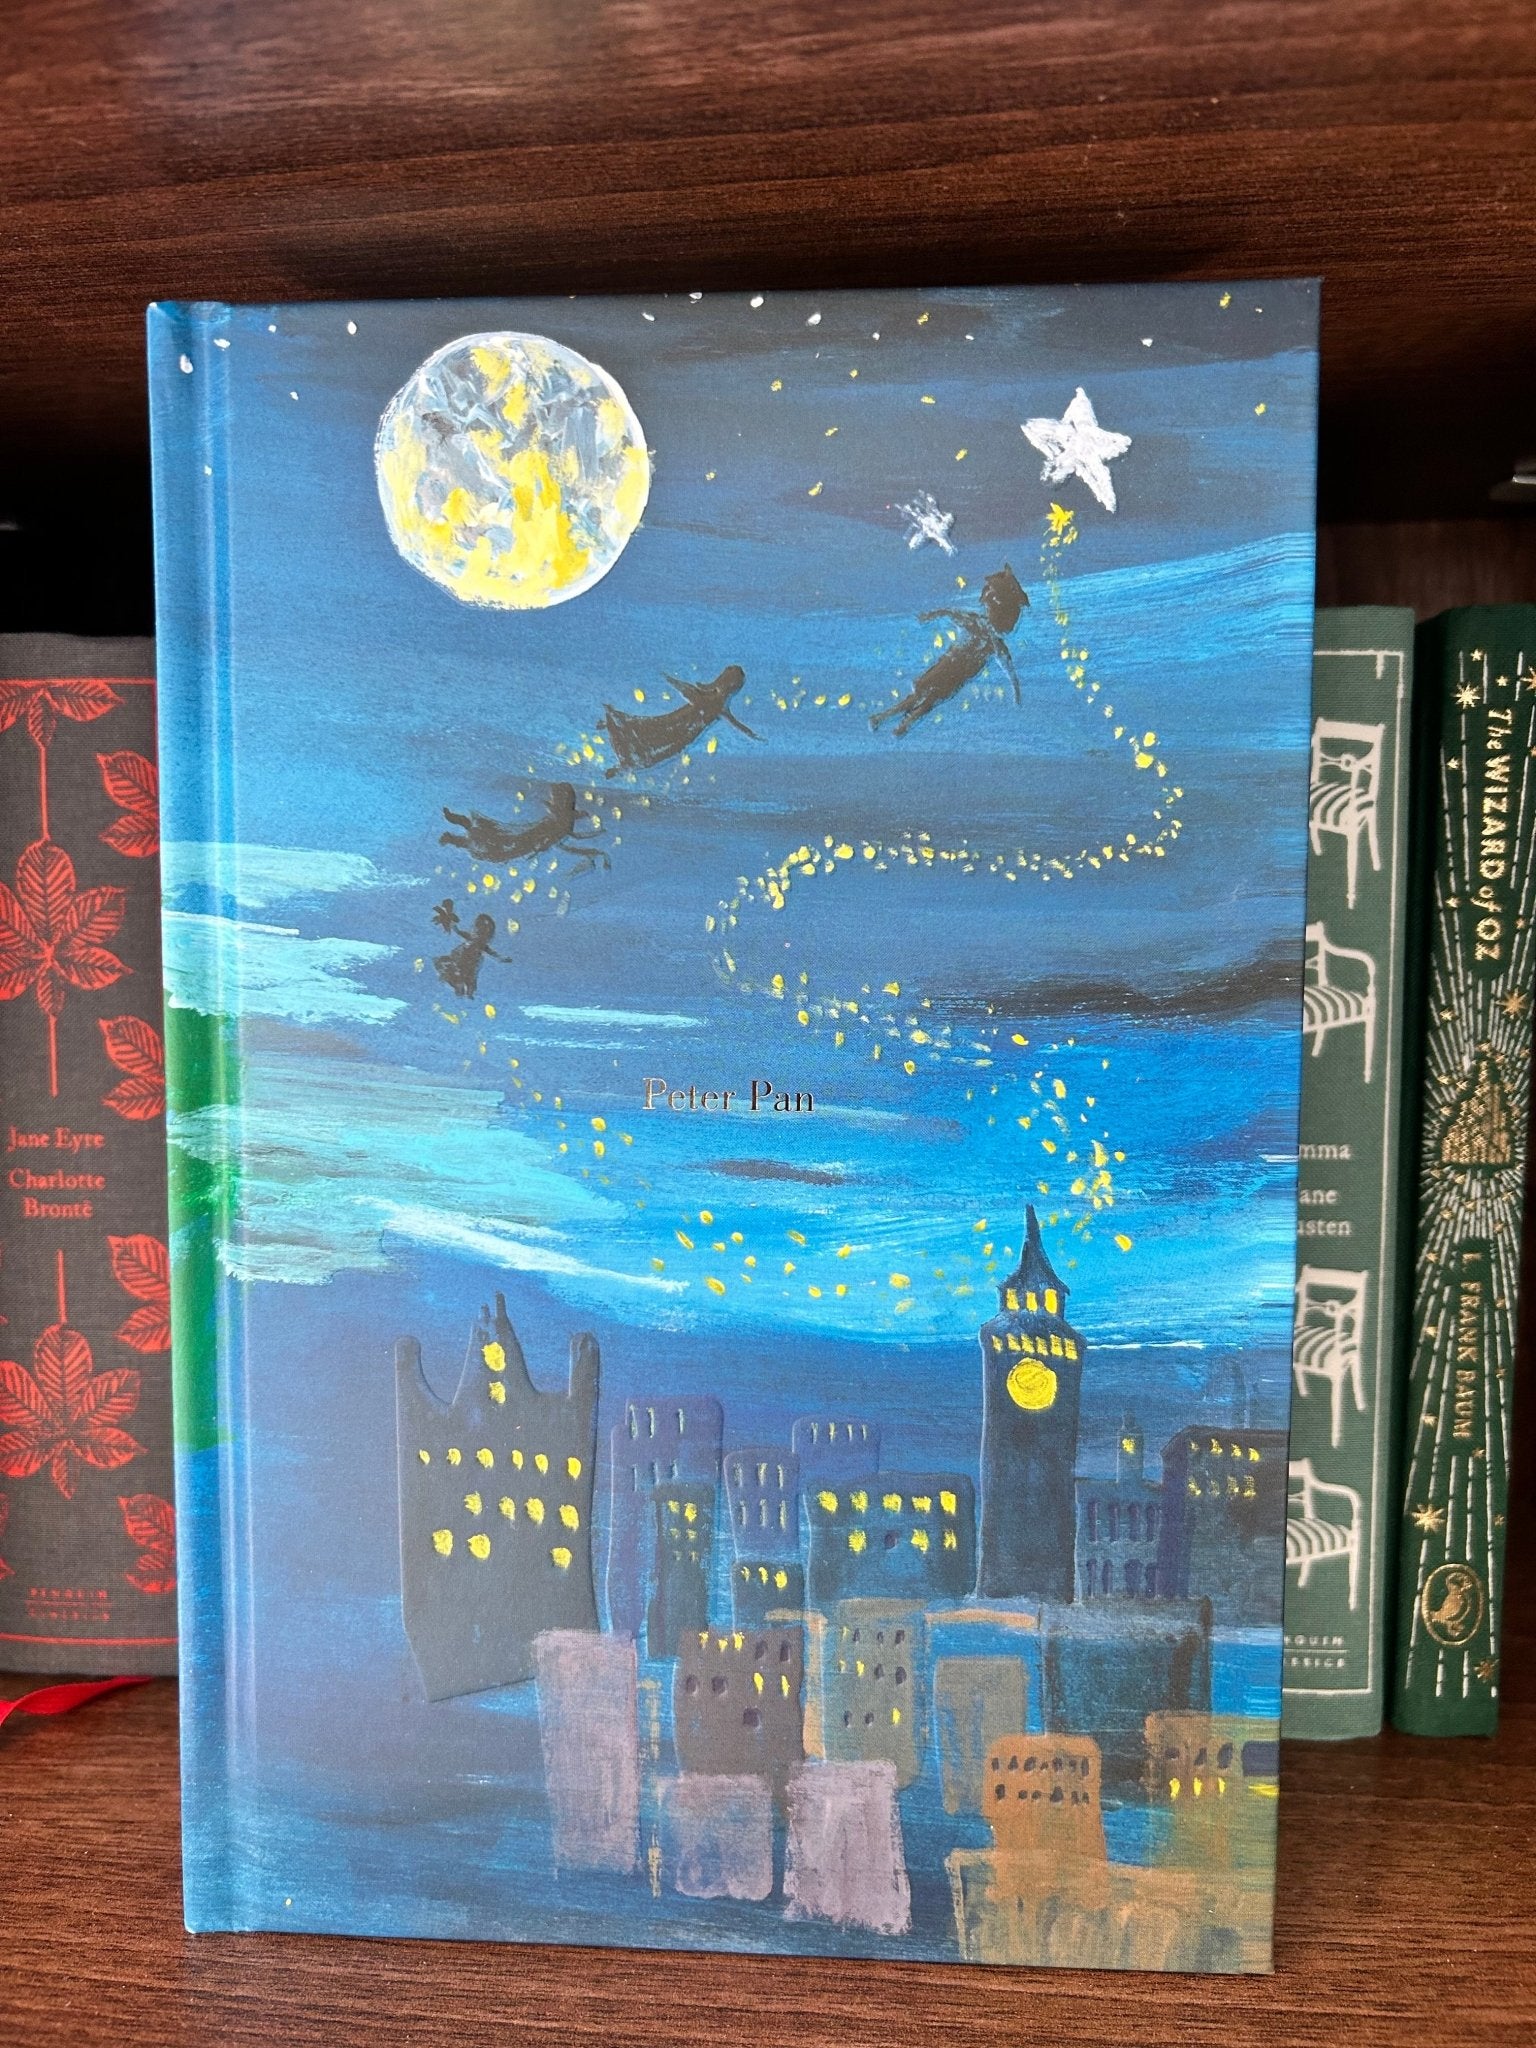 Peter Pan by J.M Barrie - Harper Muse Painted Edition - Looking Glass Books -